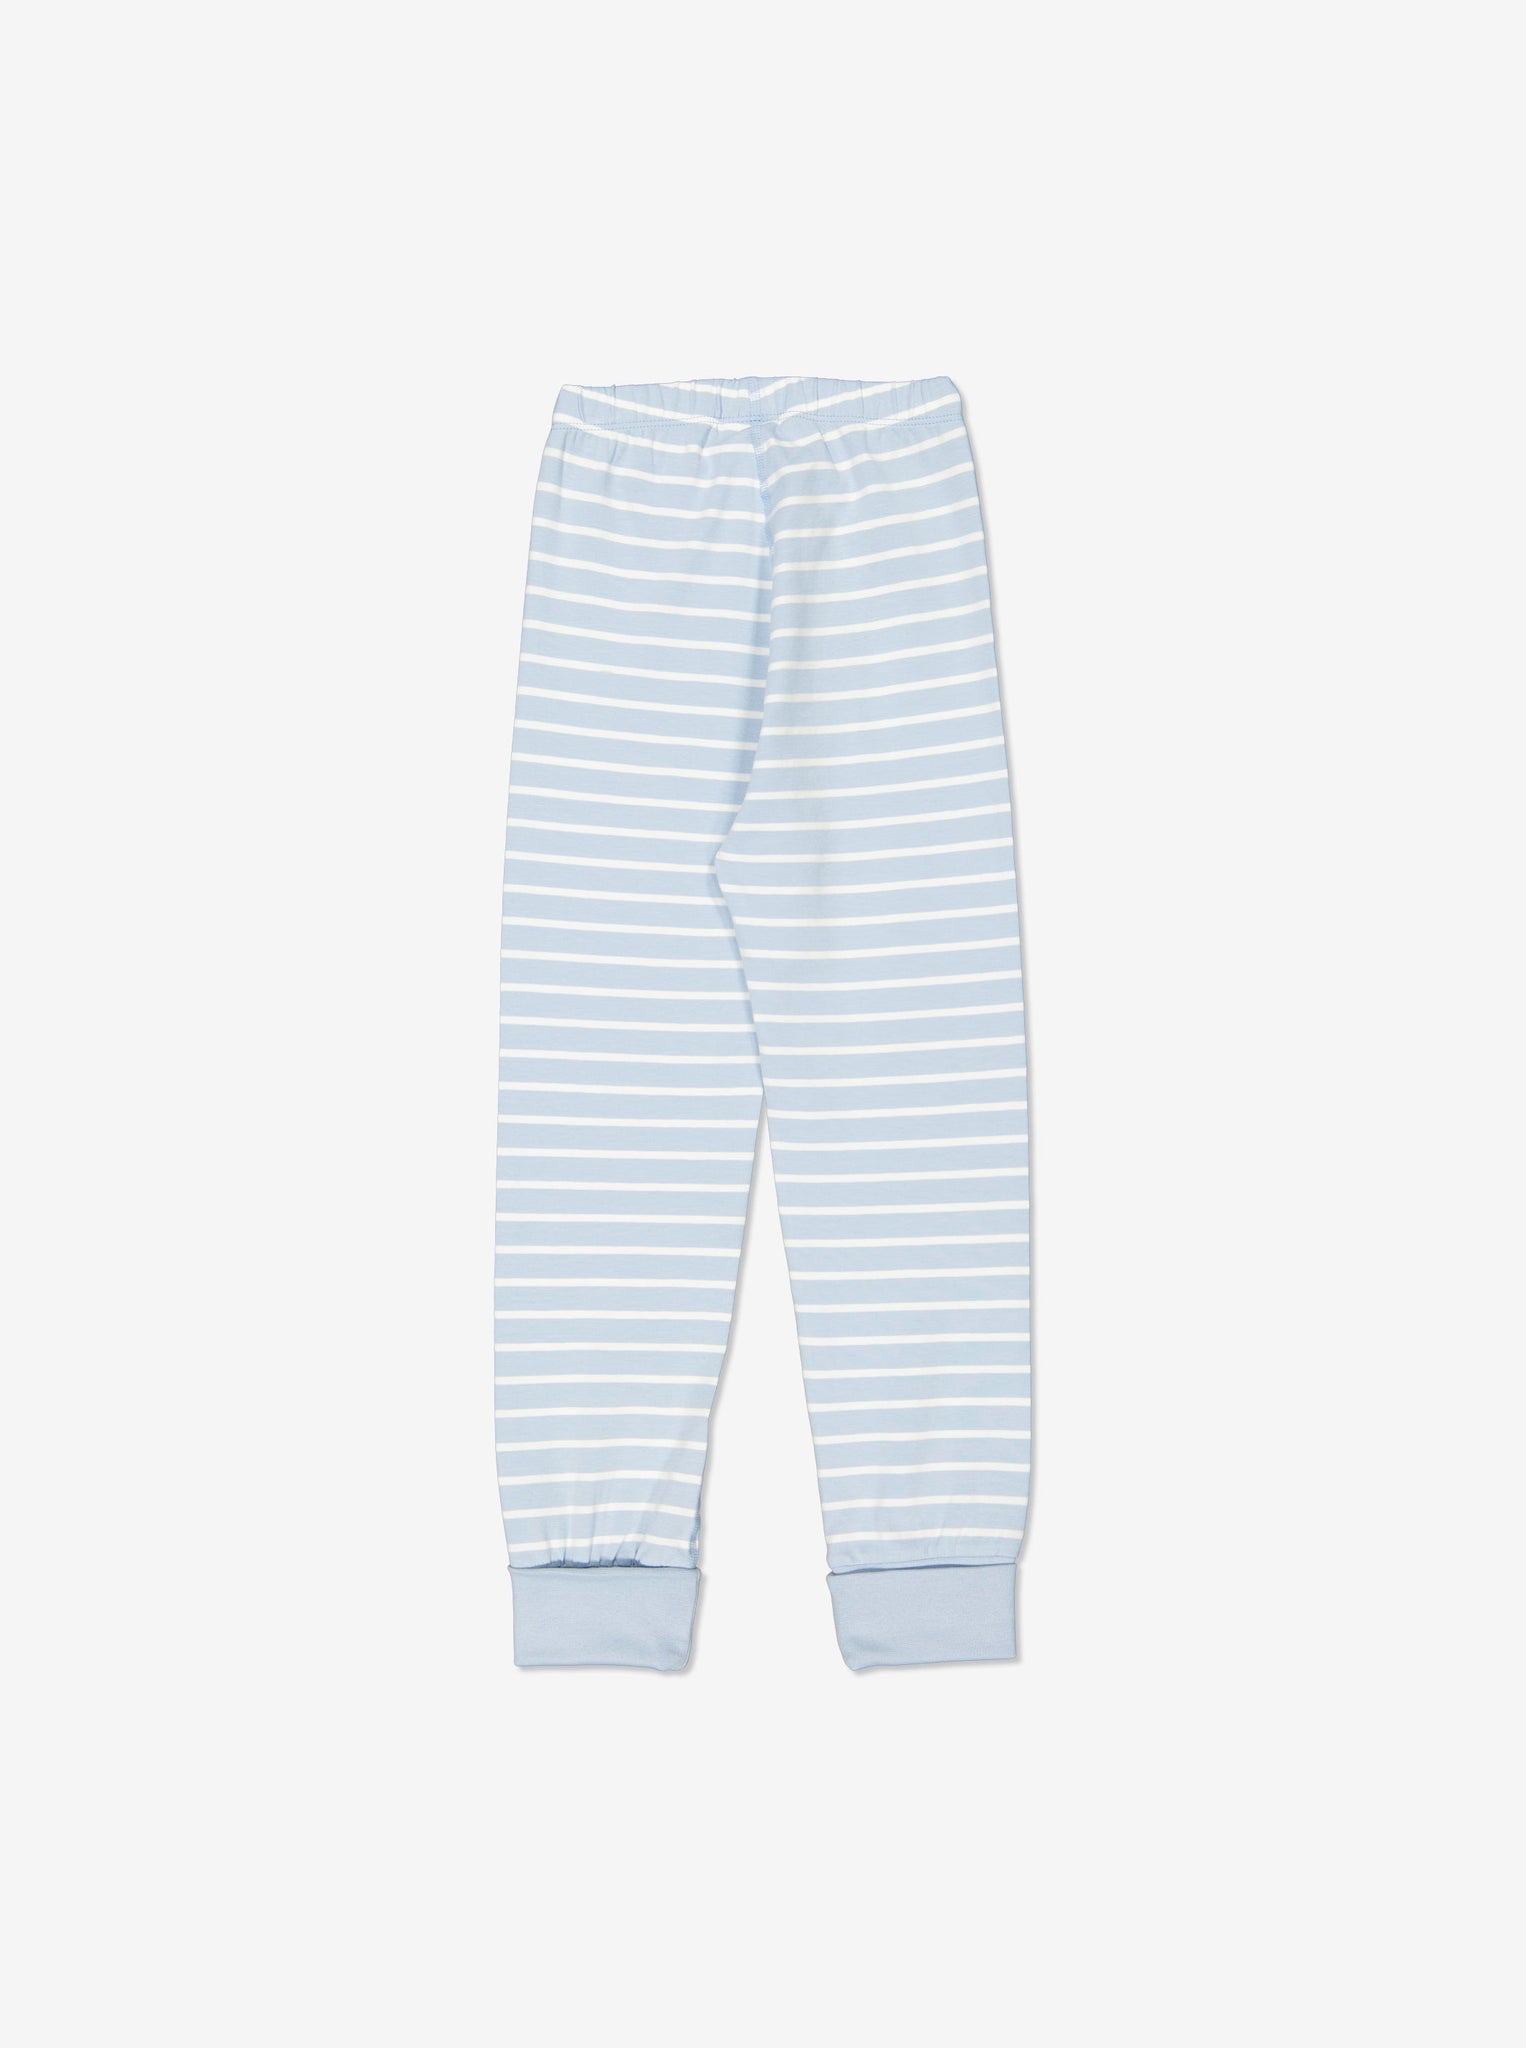 Organic Cotton Striped Blue Kids Pyjamas from Polarn O. Pyret Kidswear. Ethically made and sustainably sourced materials.